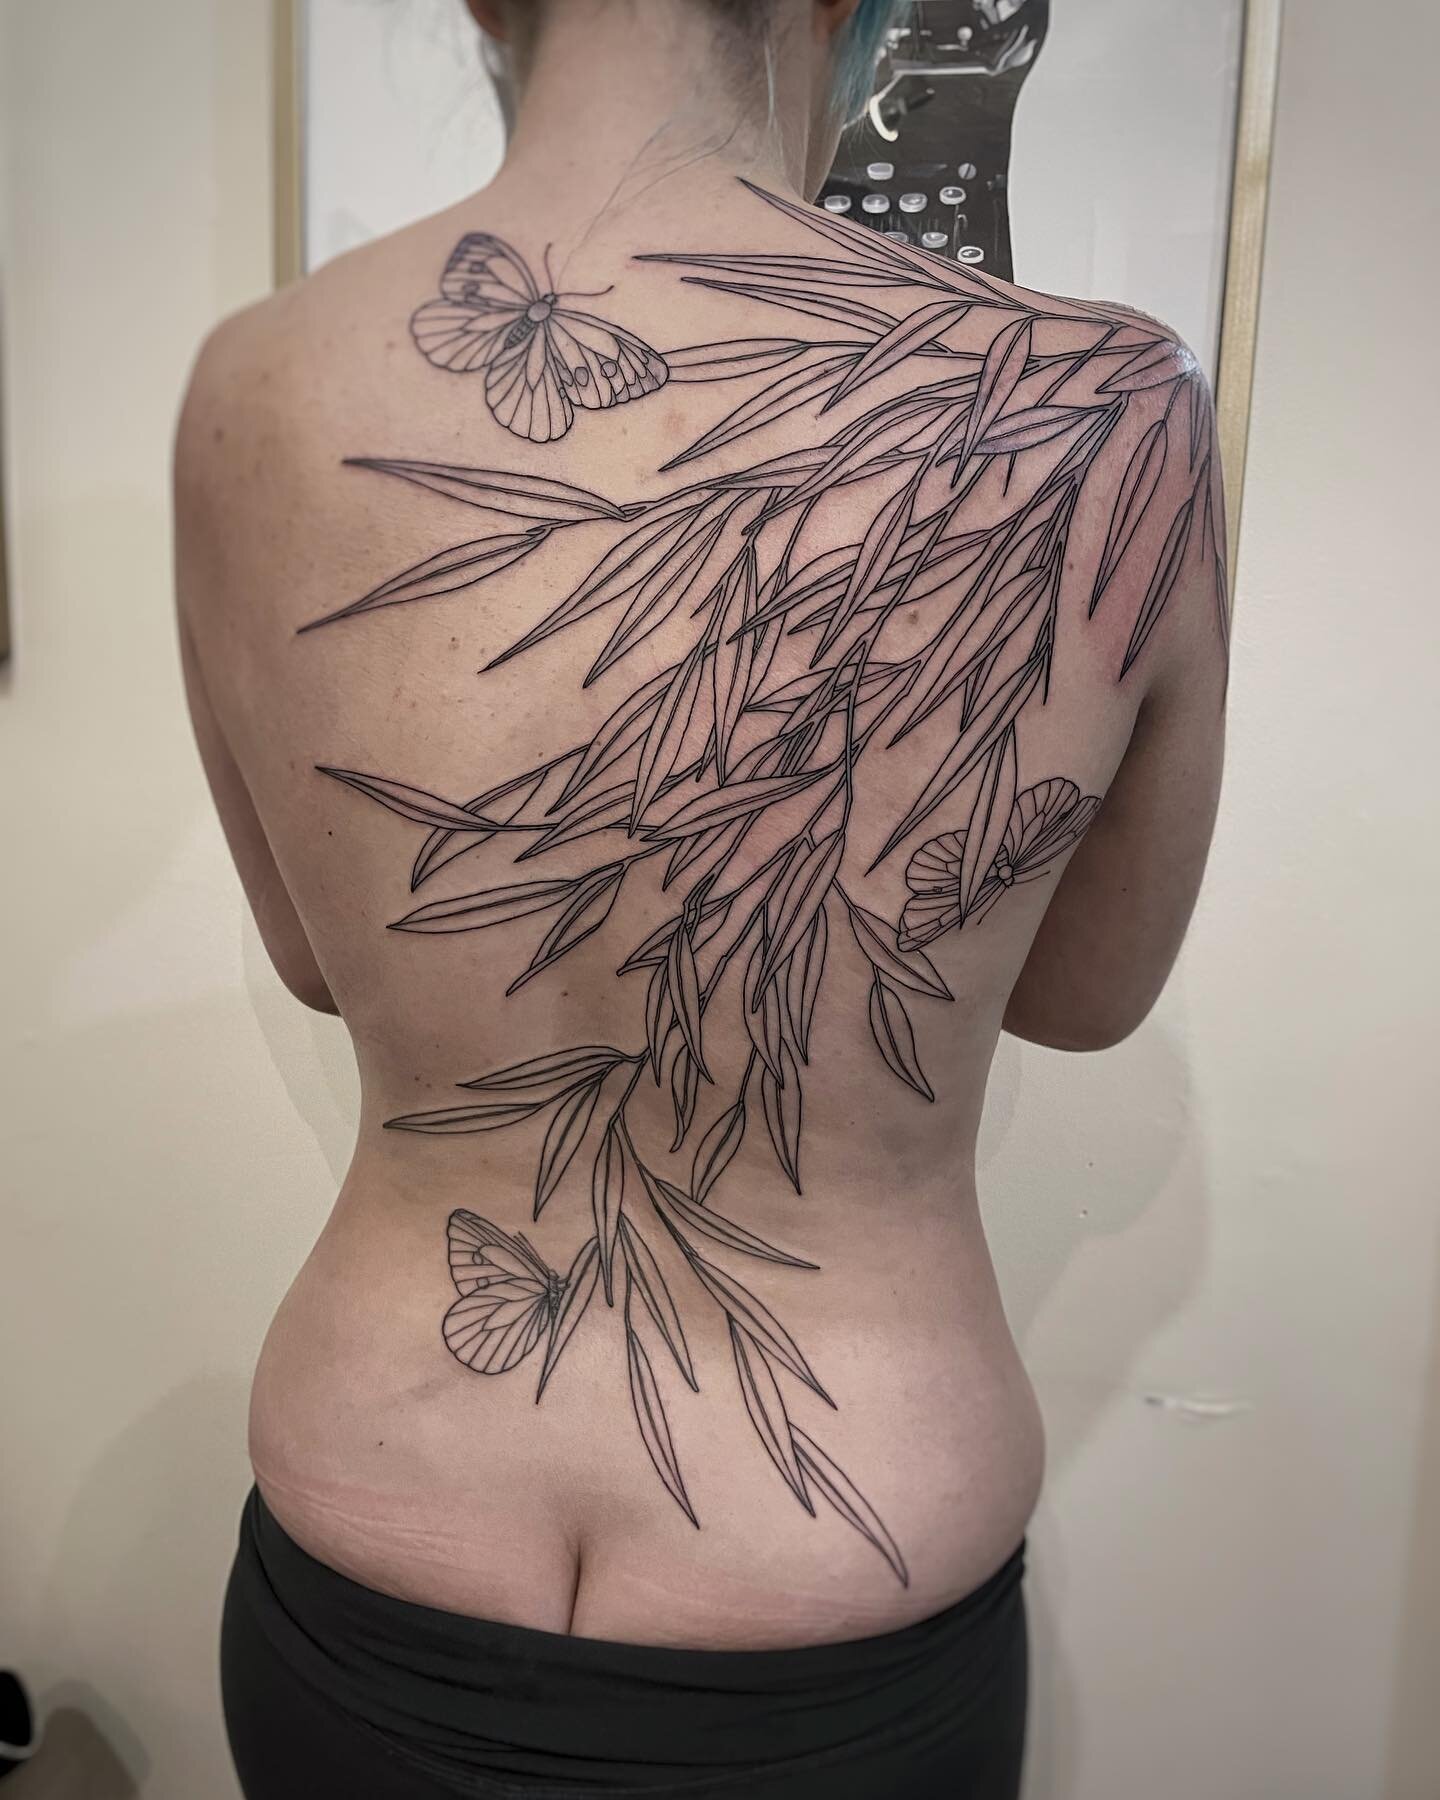 Thank you Chanelle

This was a big endeavour and leap of faith, Chanelle didn&rsquo;t think she was going to wear big tattoos, but when she saw this design her heart sang with Yes. Through this outline she discovered the power of breath and positive 